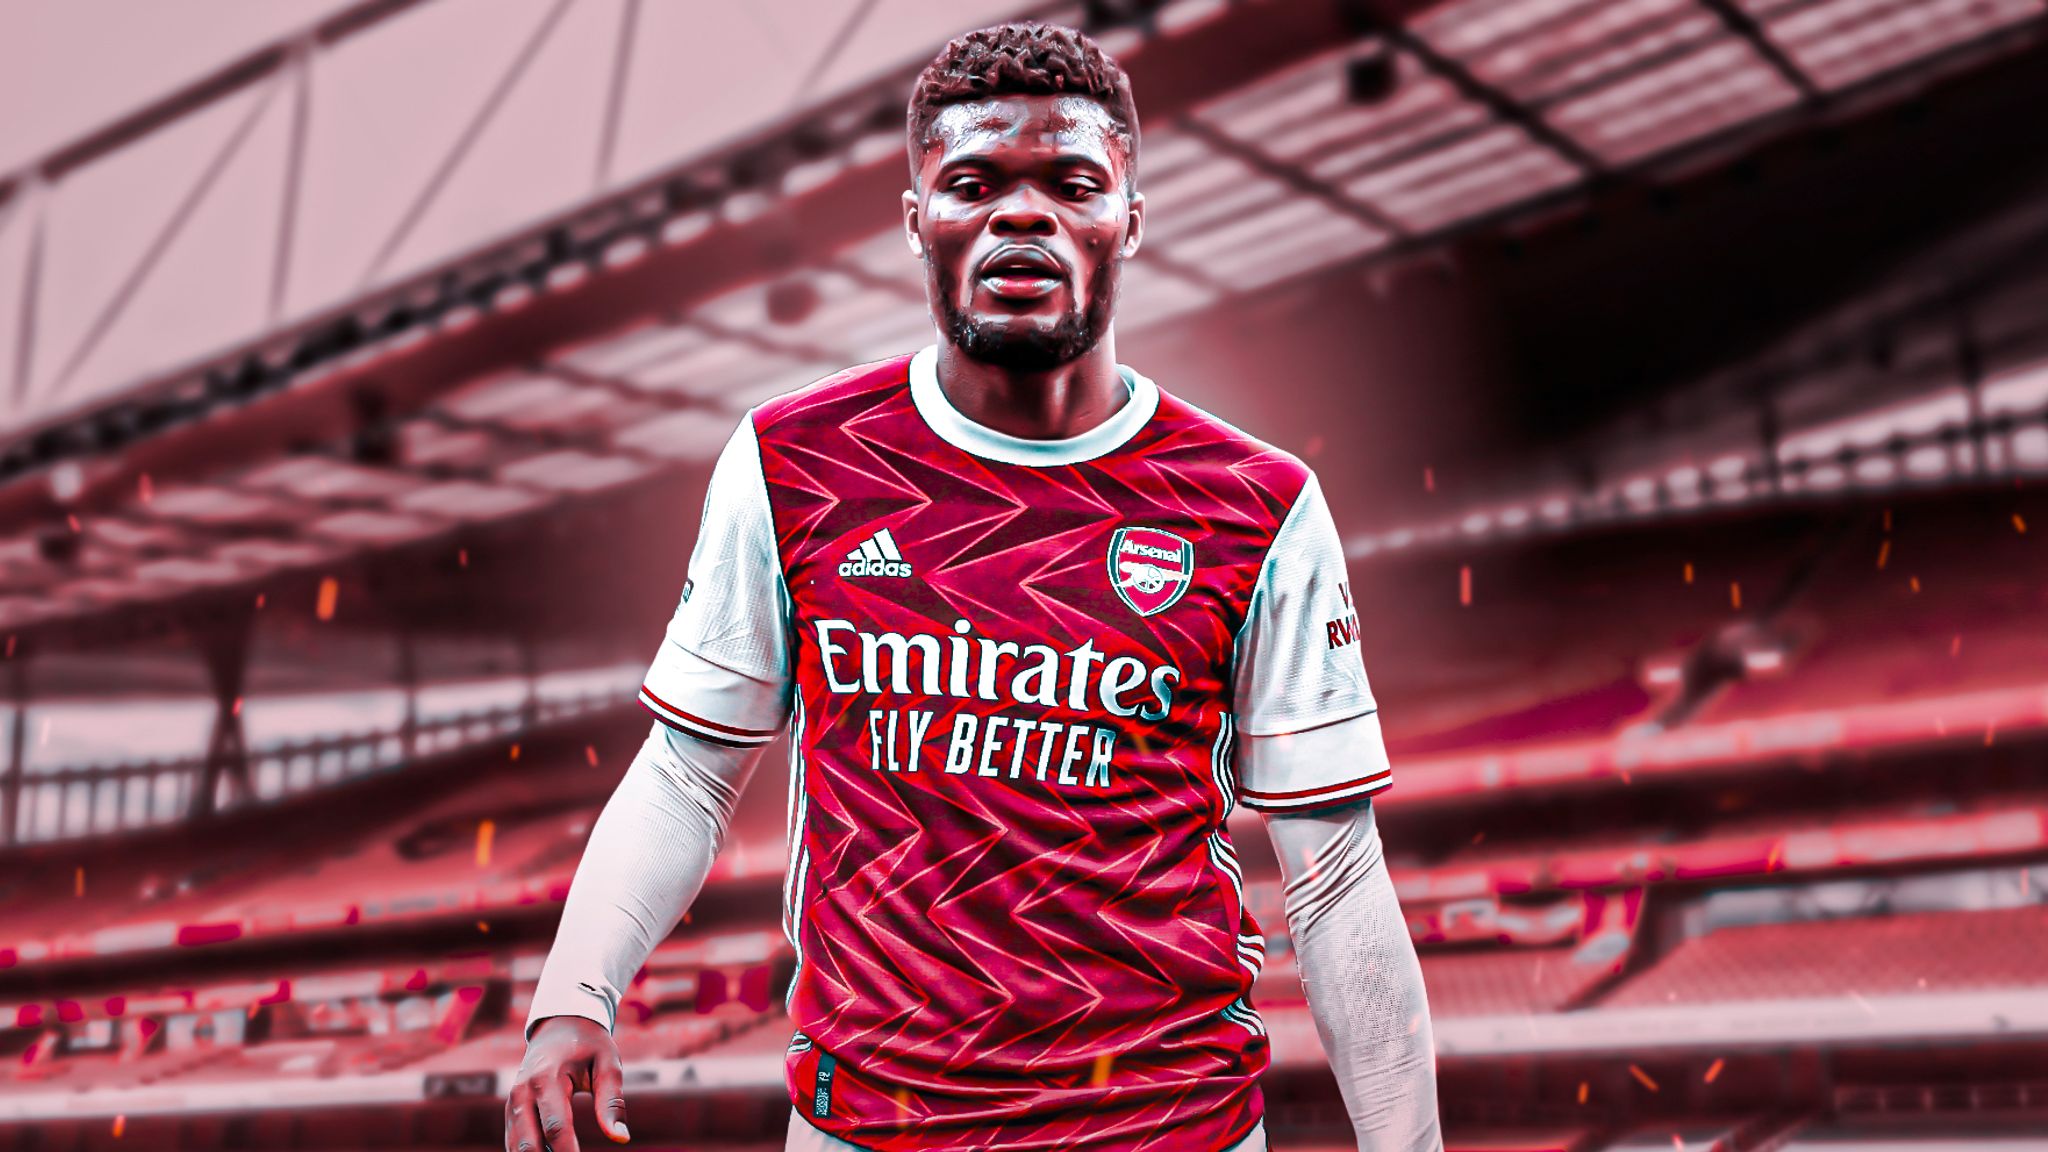 Thomas Partey Arsenal S 45m Midfielder Is A Physical Marvel Who Does Everything Well Football News Sky Sports